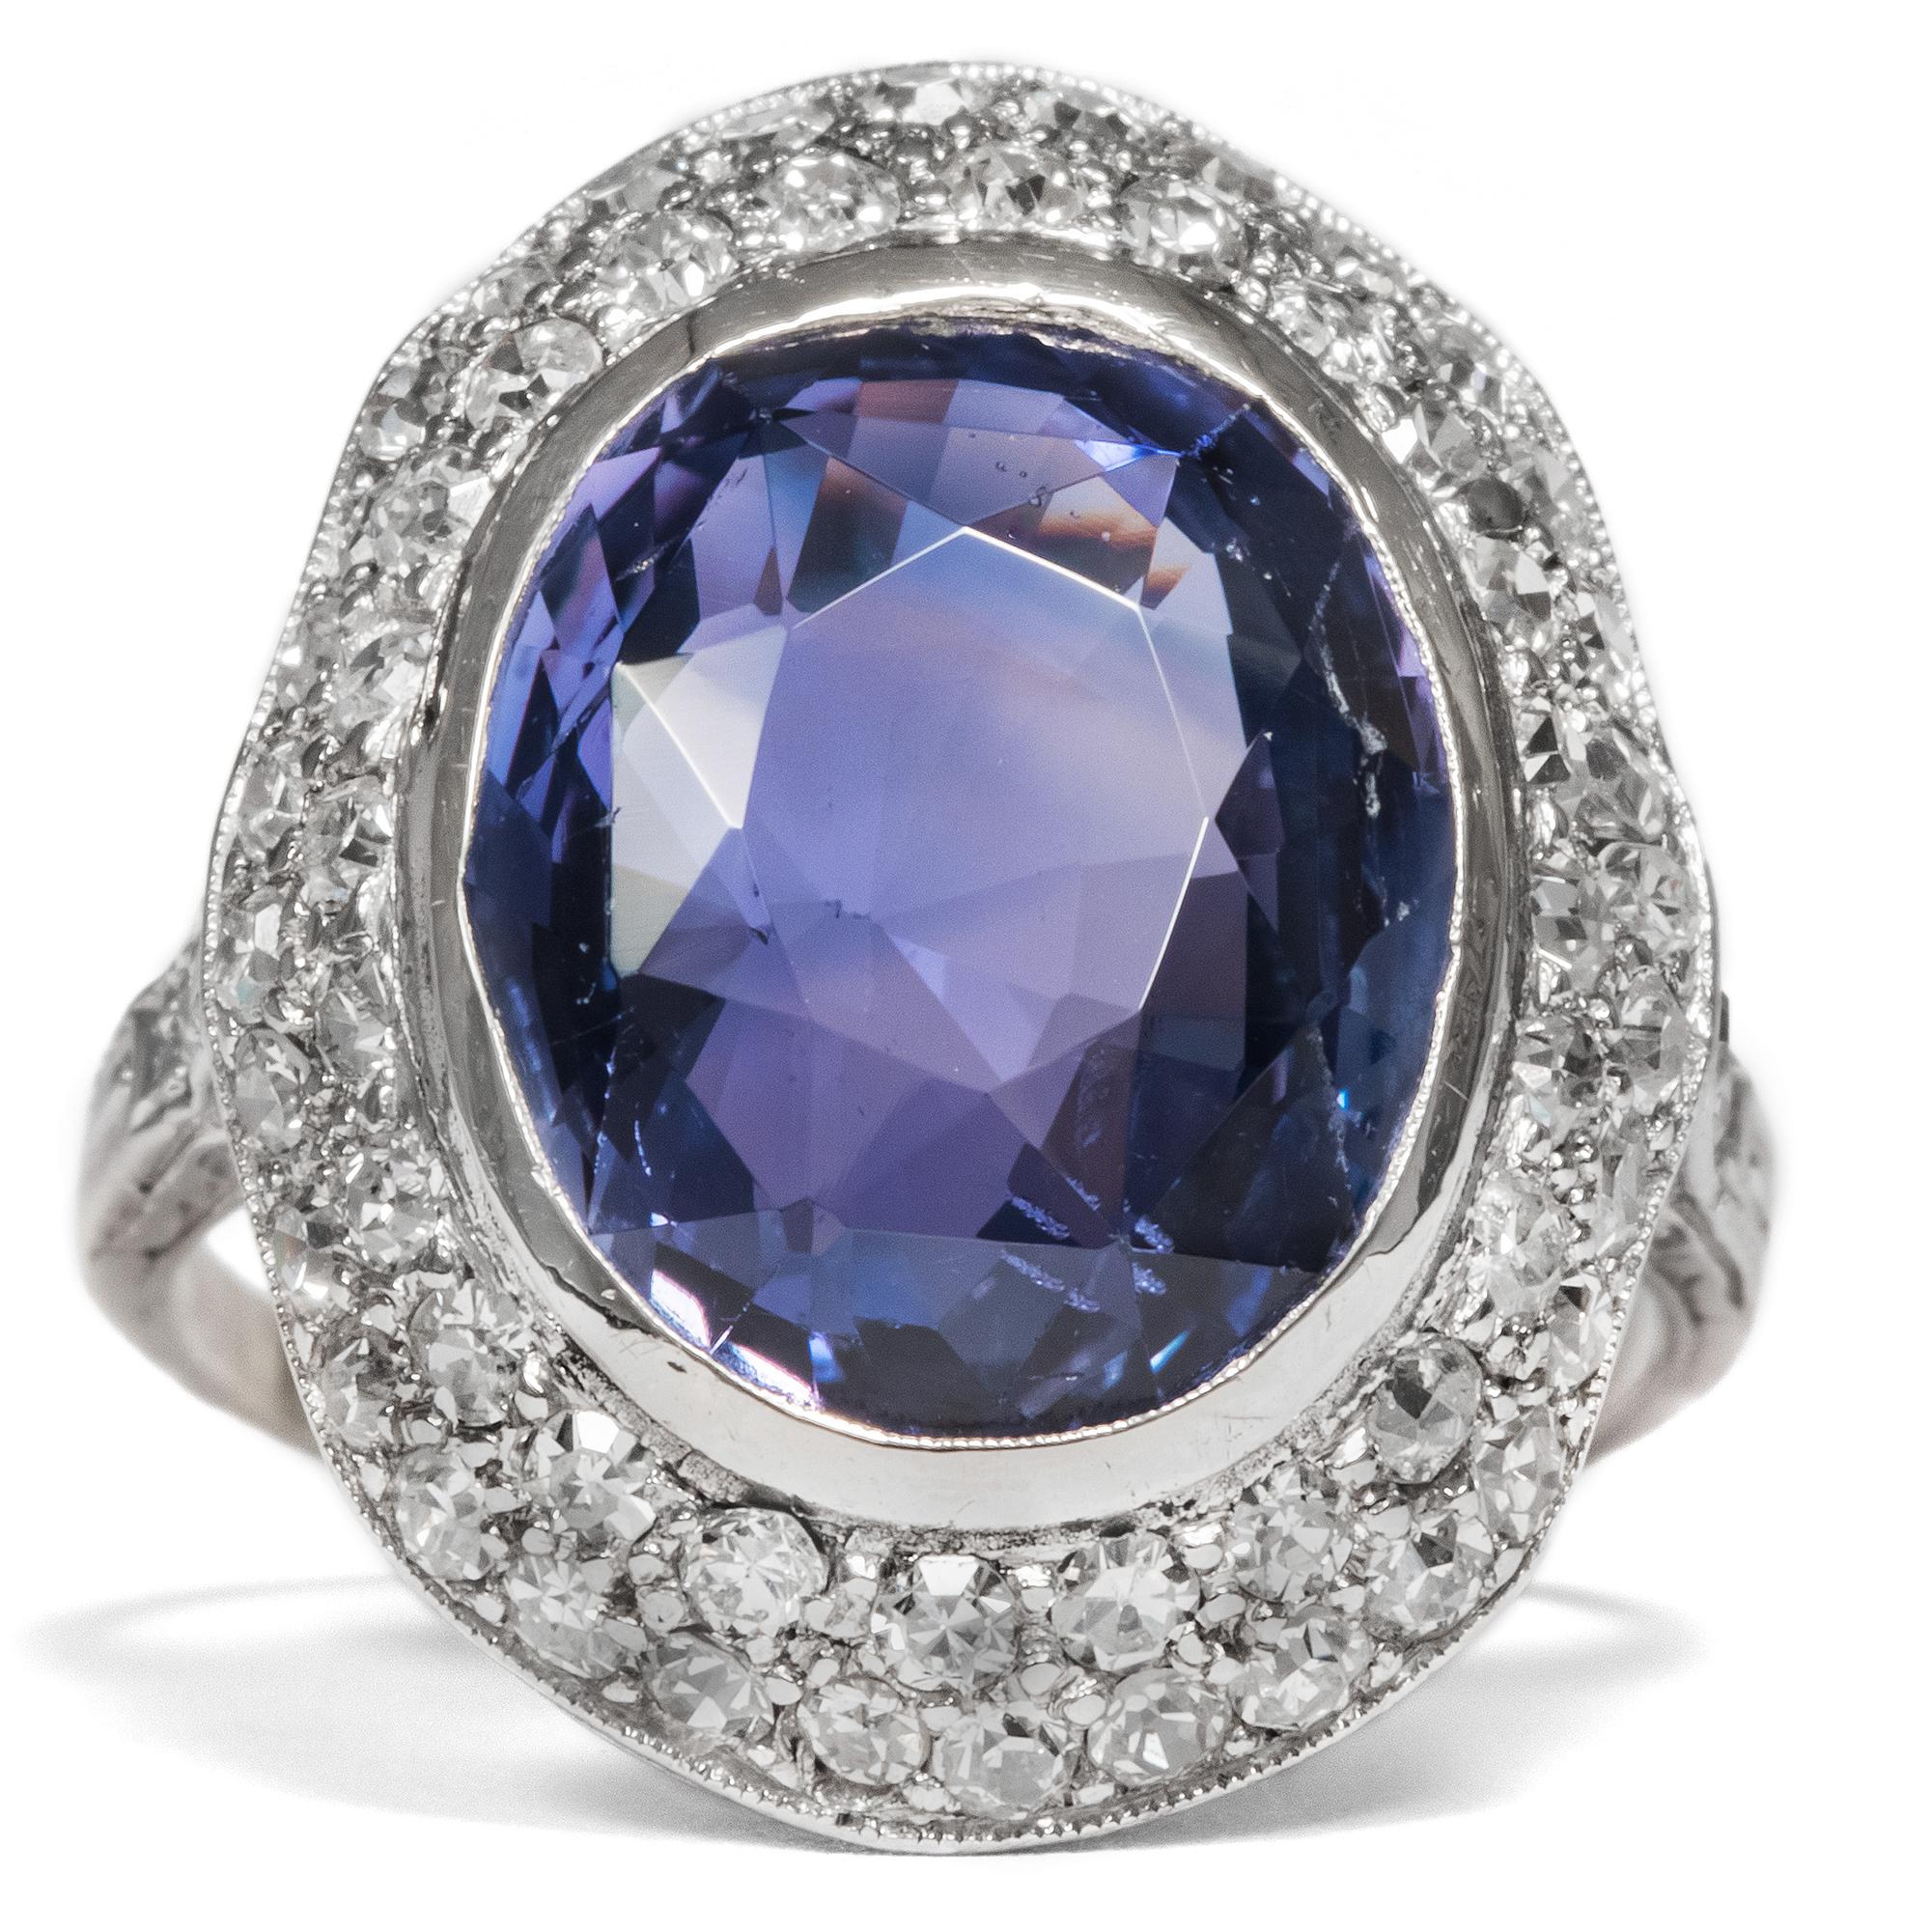 A natural, untreated ('no heat') blue sapphire with a delicate tint of violet is the focal point of this spectacular Art Déco ring. The precious gemstone weighs in at approx. 8.50 ct and is presented in a unique, beautifully faceted cut. Its